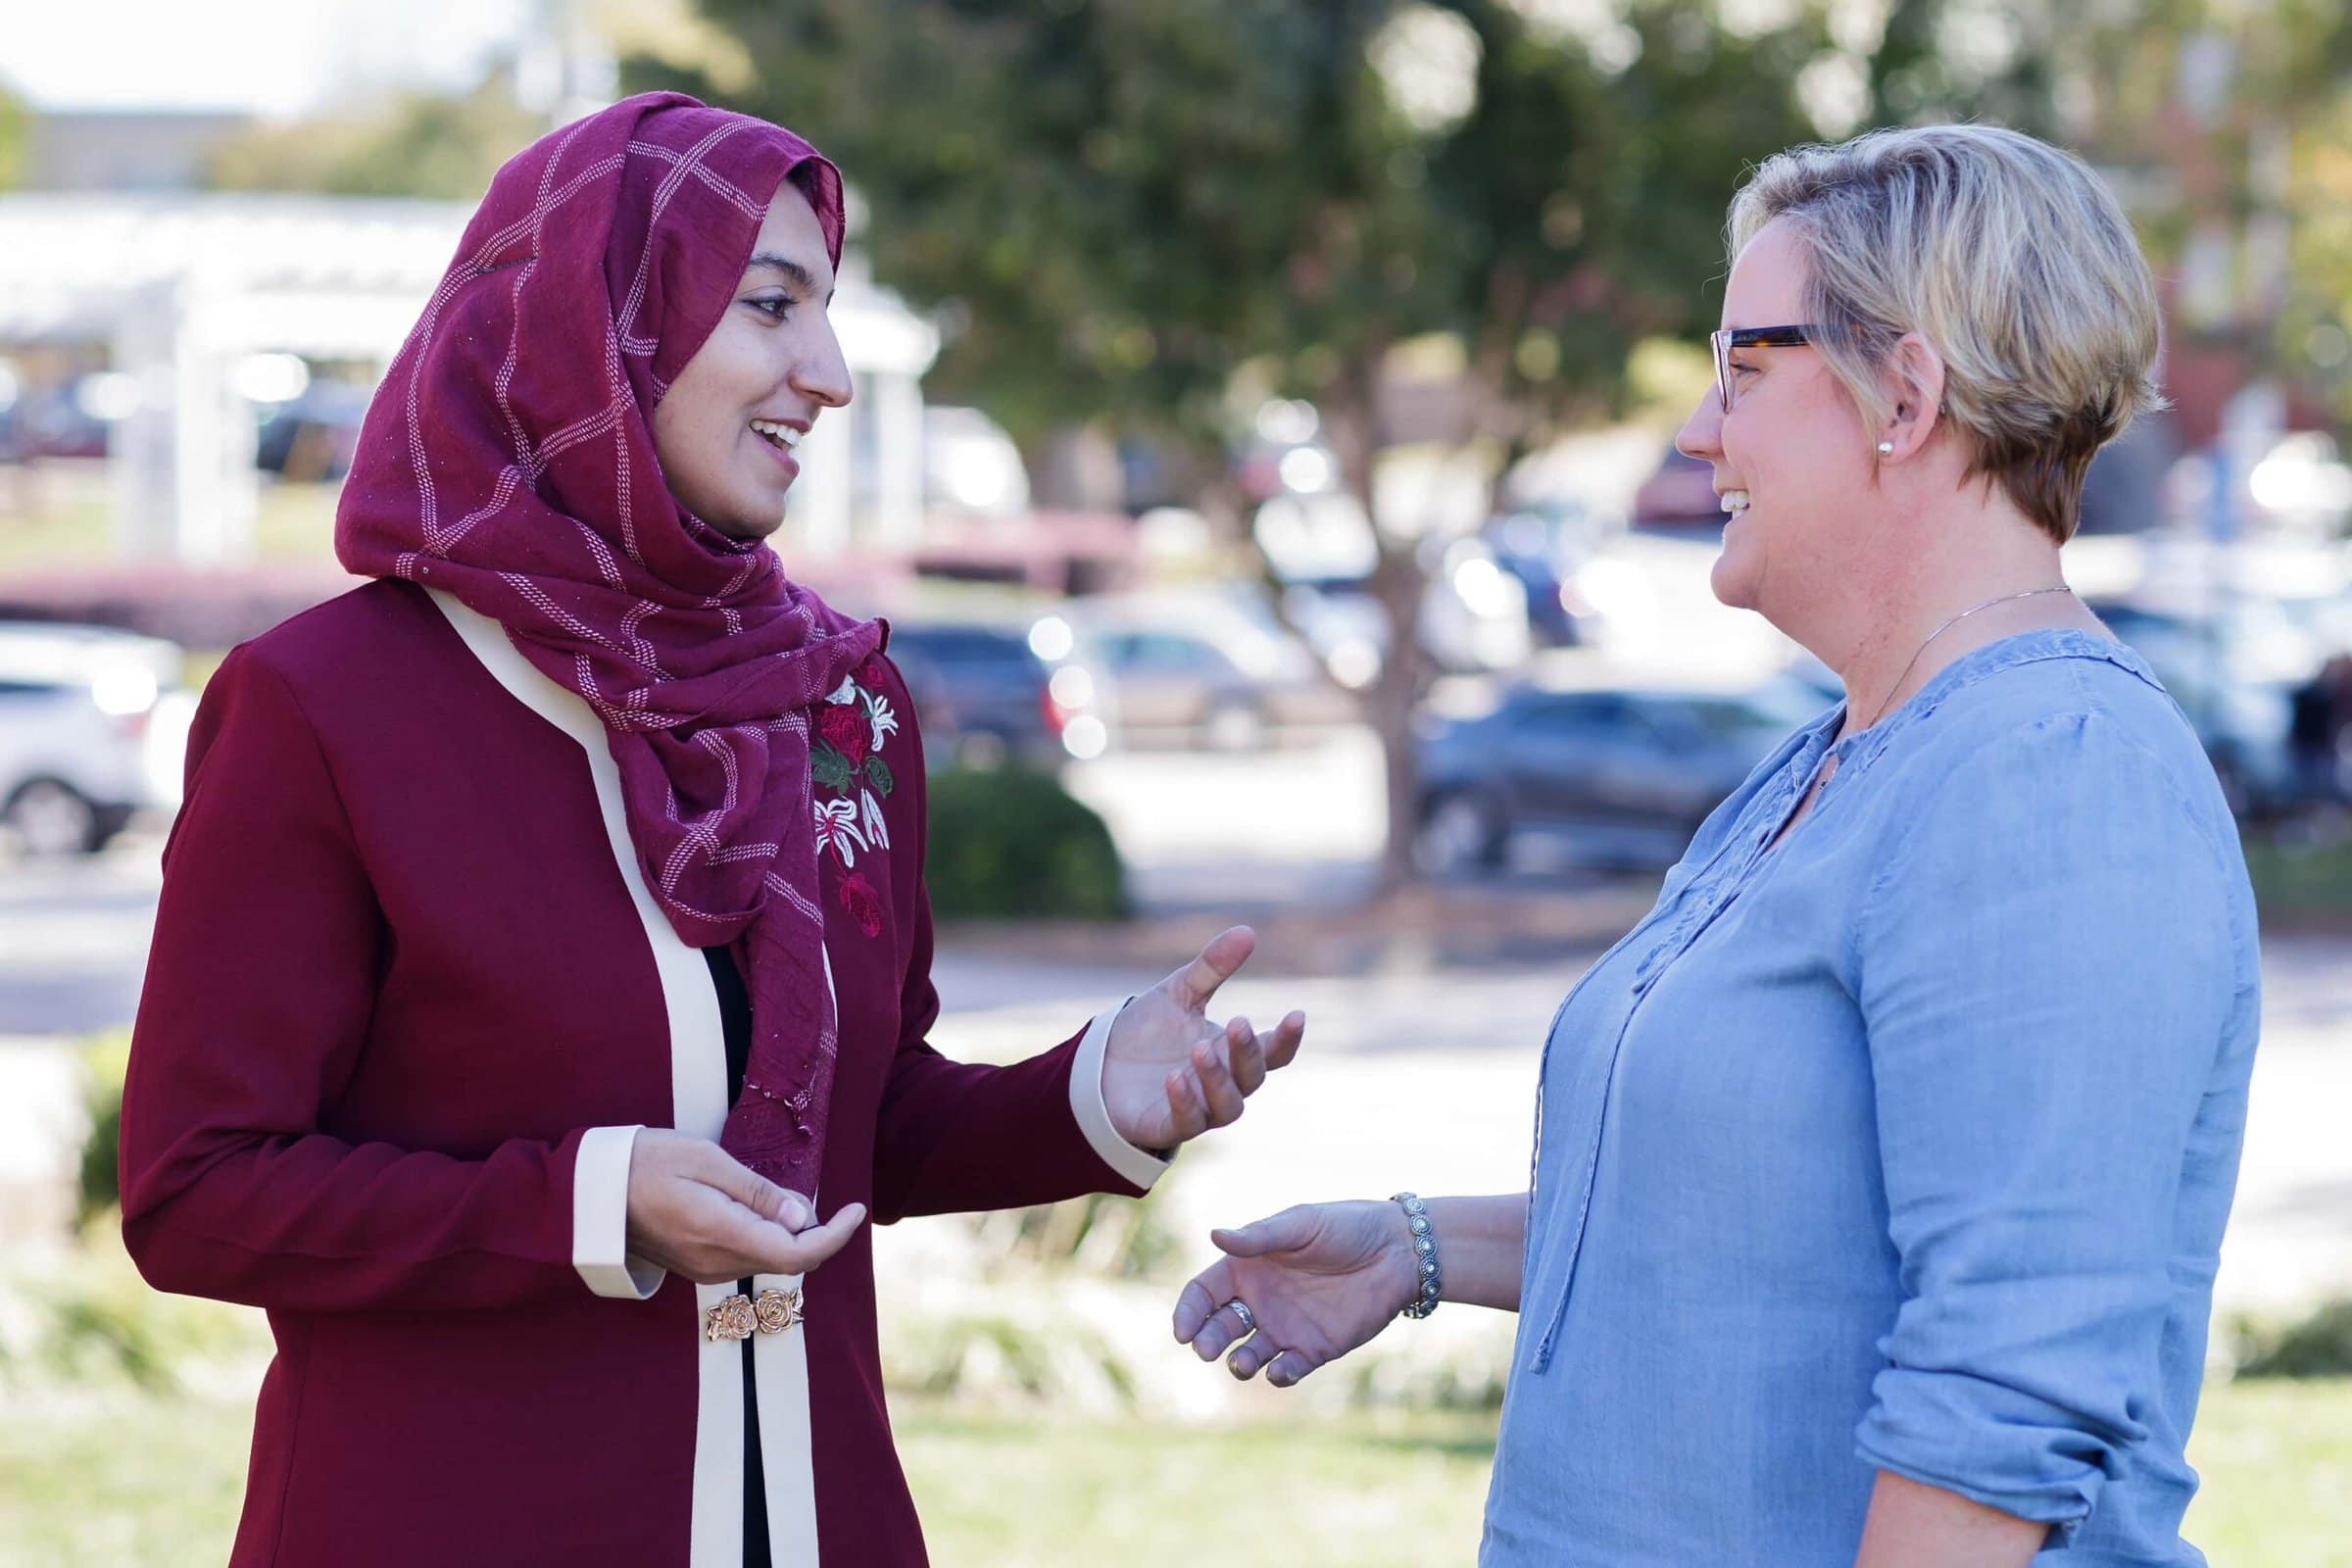 Maryem, a Women's College alumna from Afghanistan, speaks with Tami English on campus. (AJ Reynolds/Brenau University)